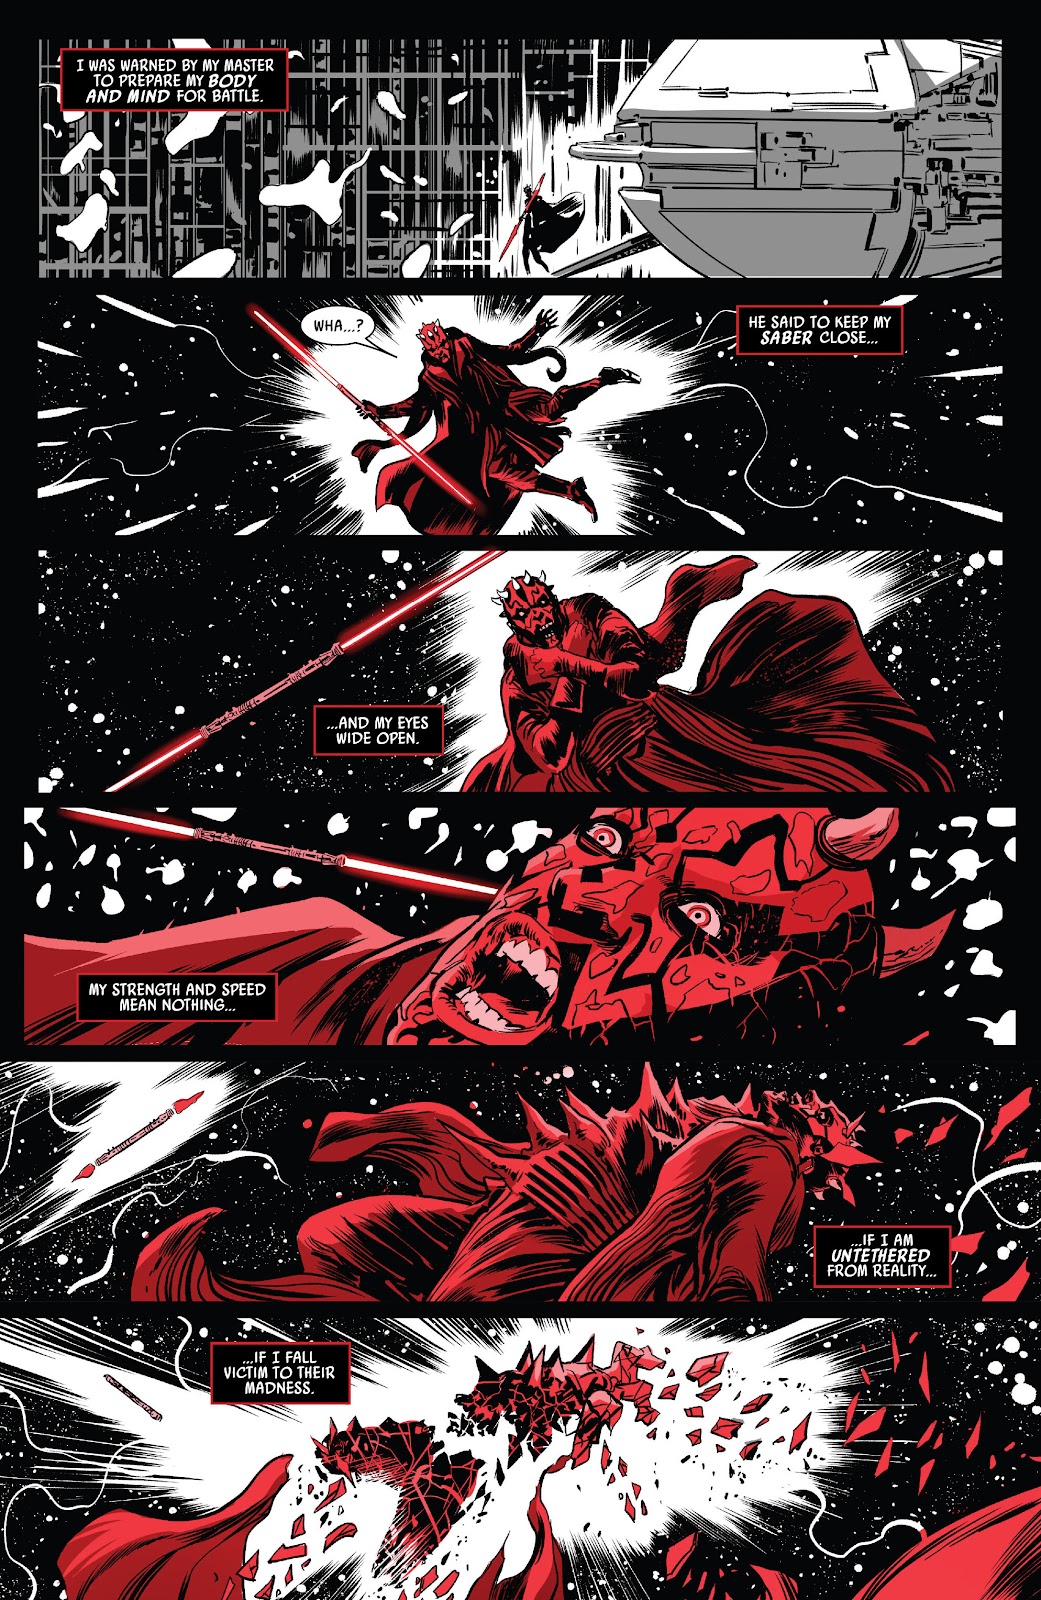 Star Wars: Darth Maul - Black, White & Red issue 1 - Page 9